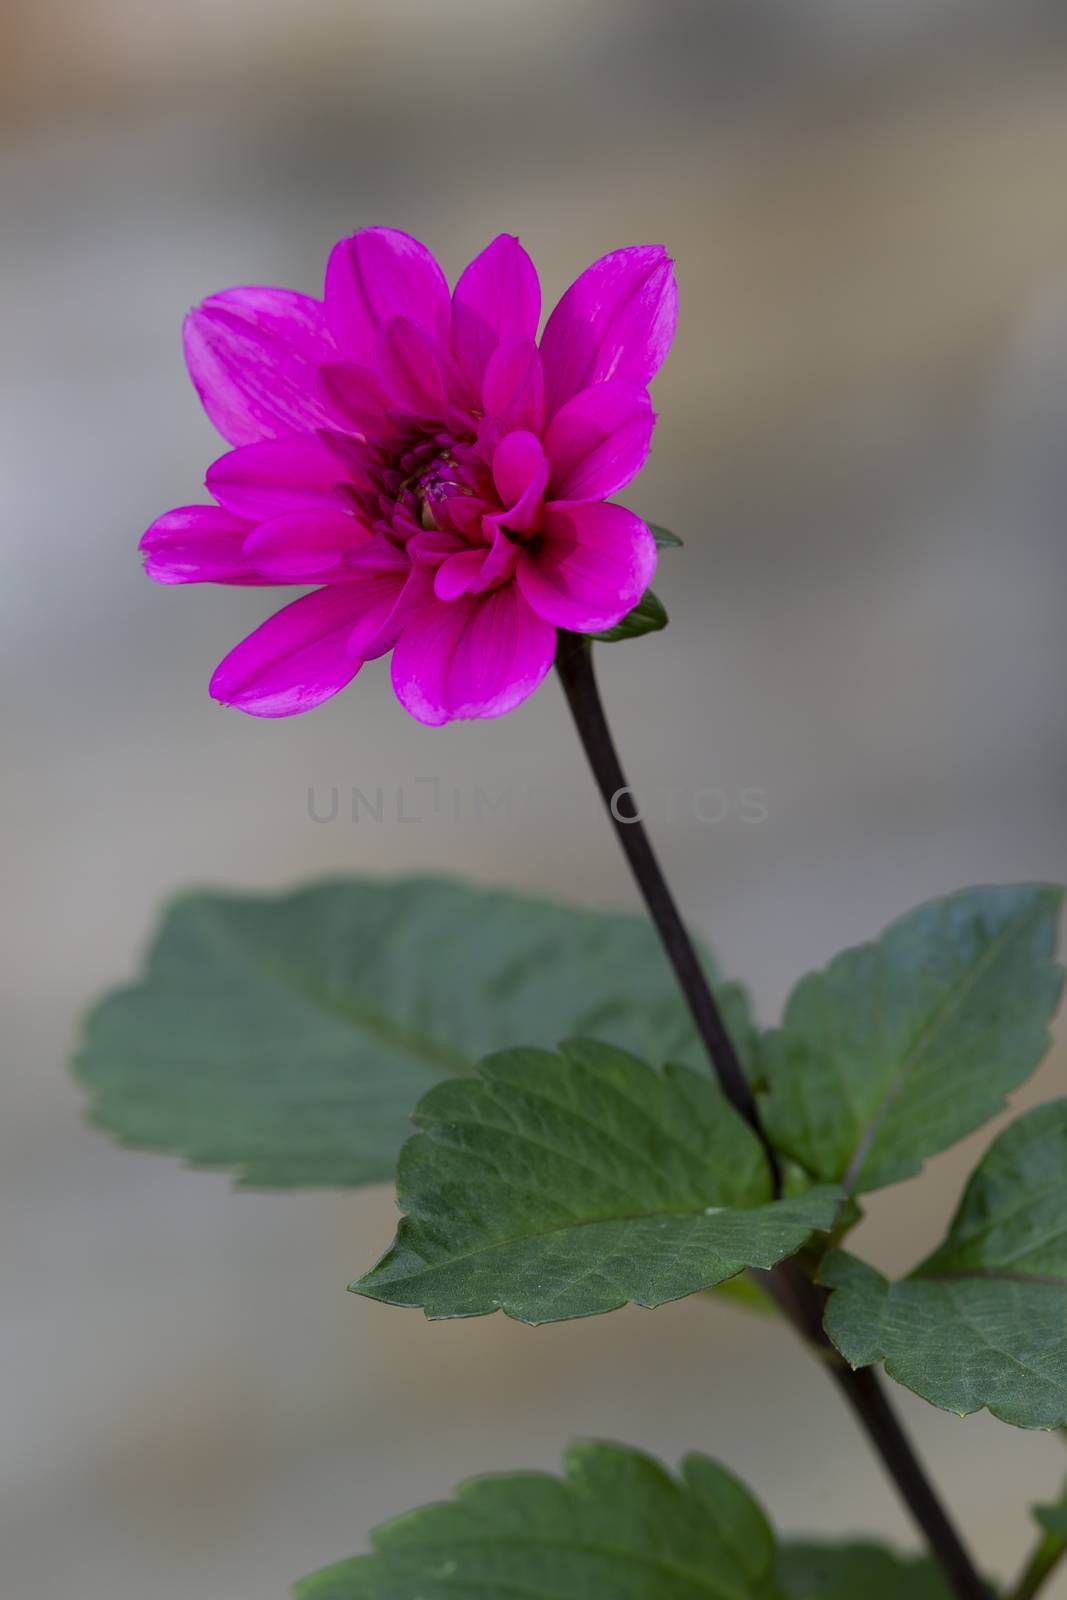 A blossoming pink flower with a long stem and green leaves